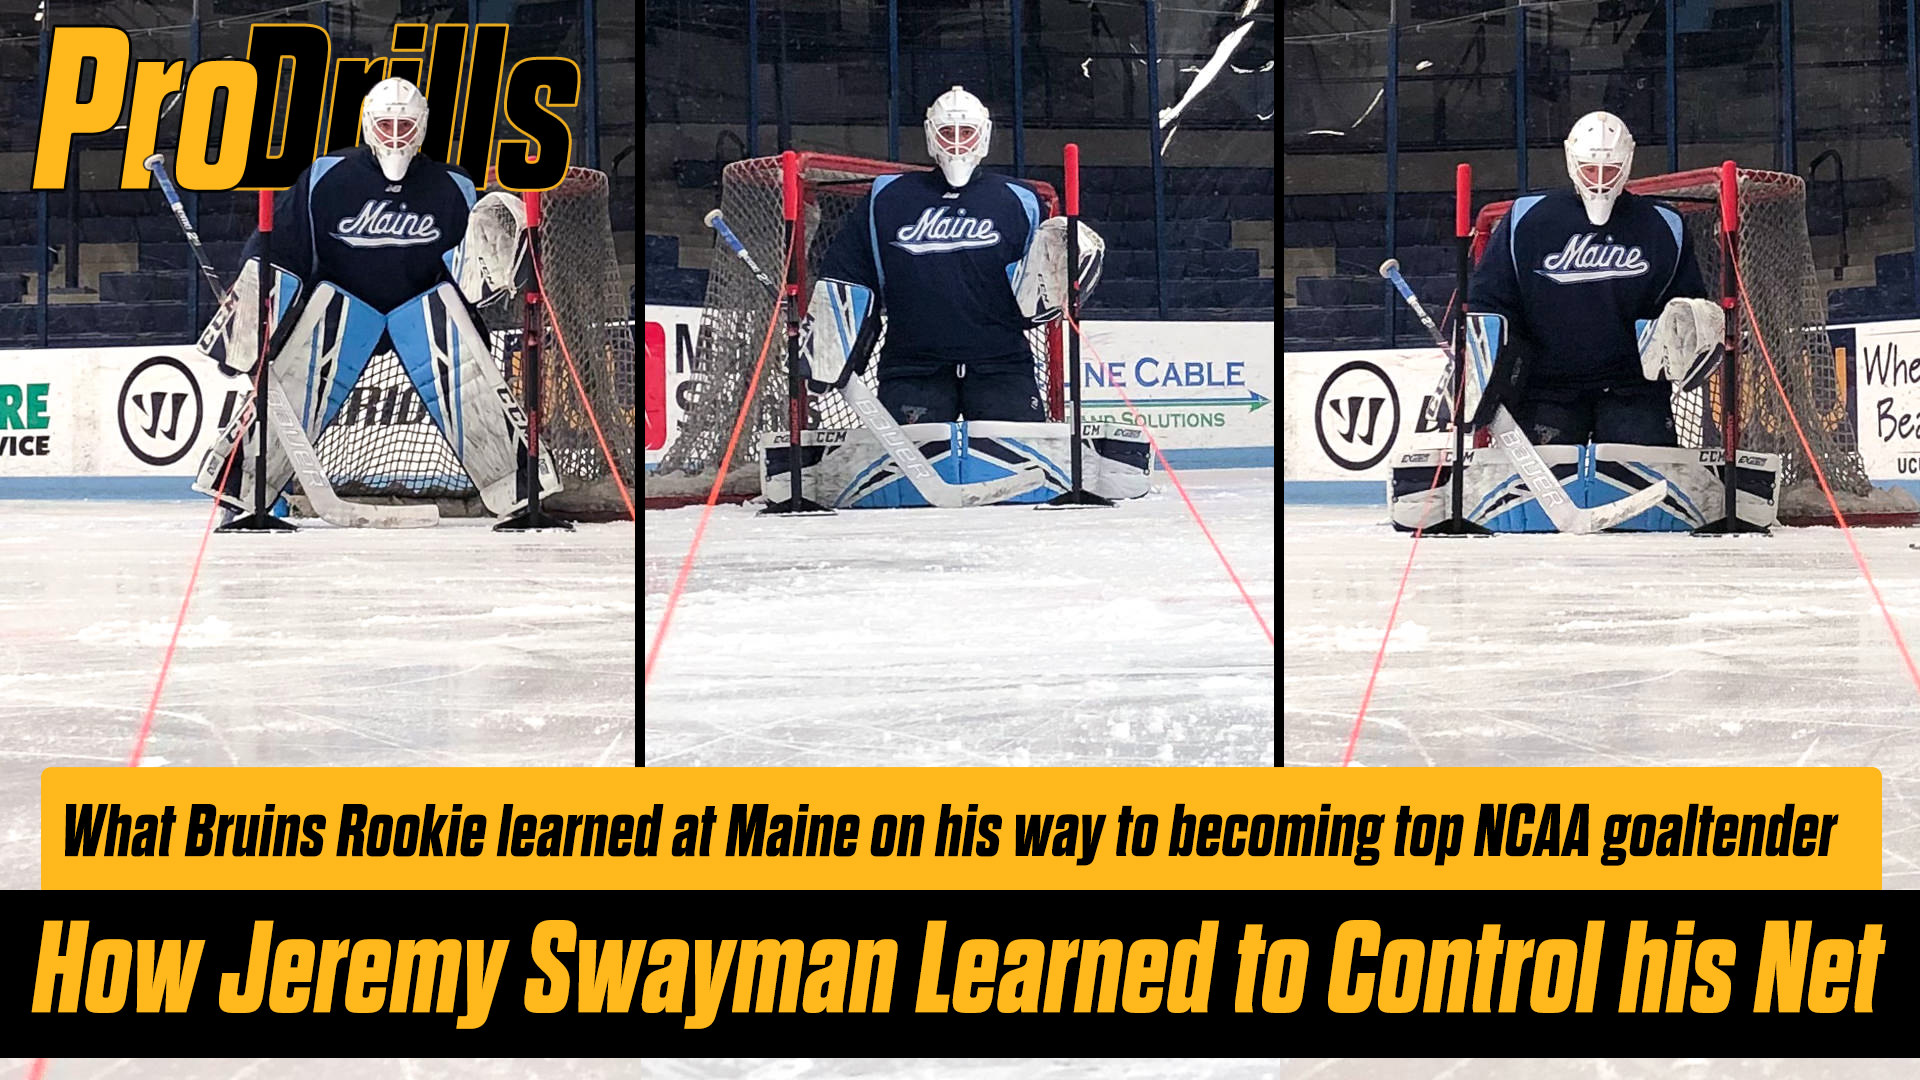 How Jeremy Swayman Learned to Control his Net